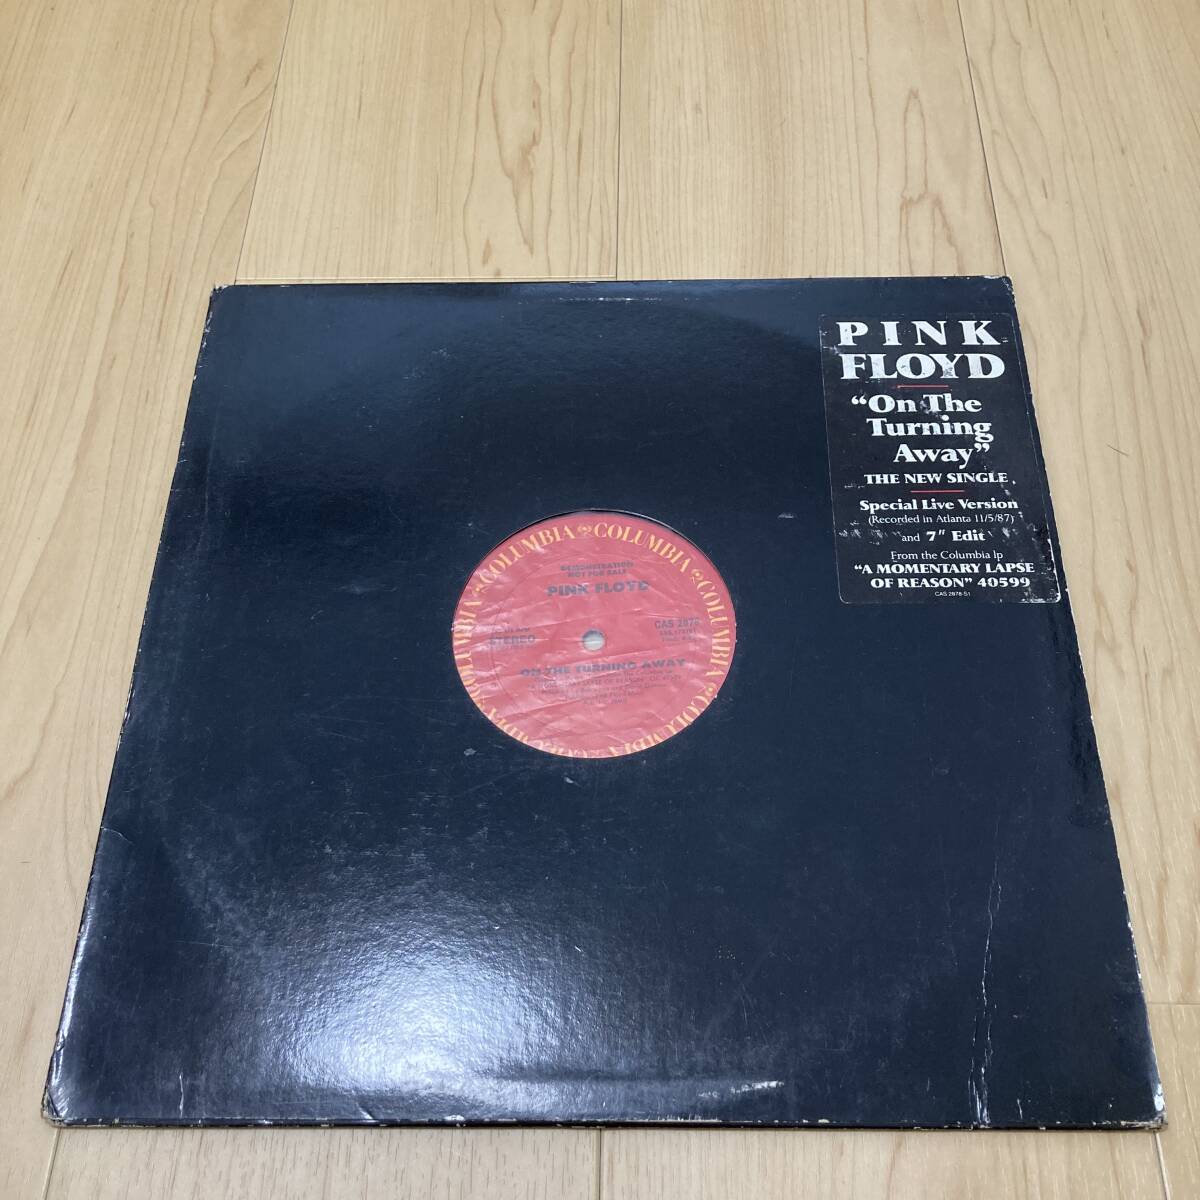 Pink Floyd - On The Turning Away 12 INCH